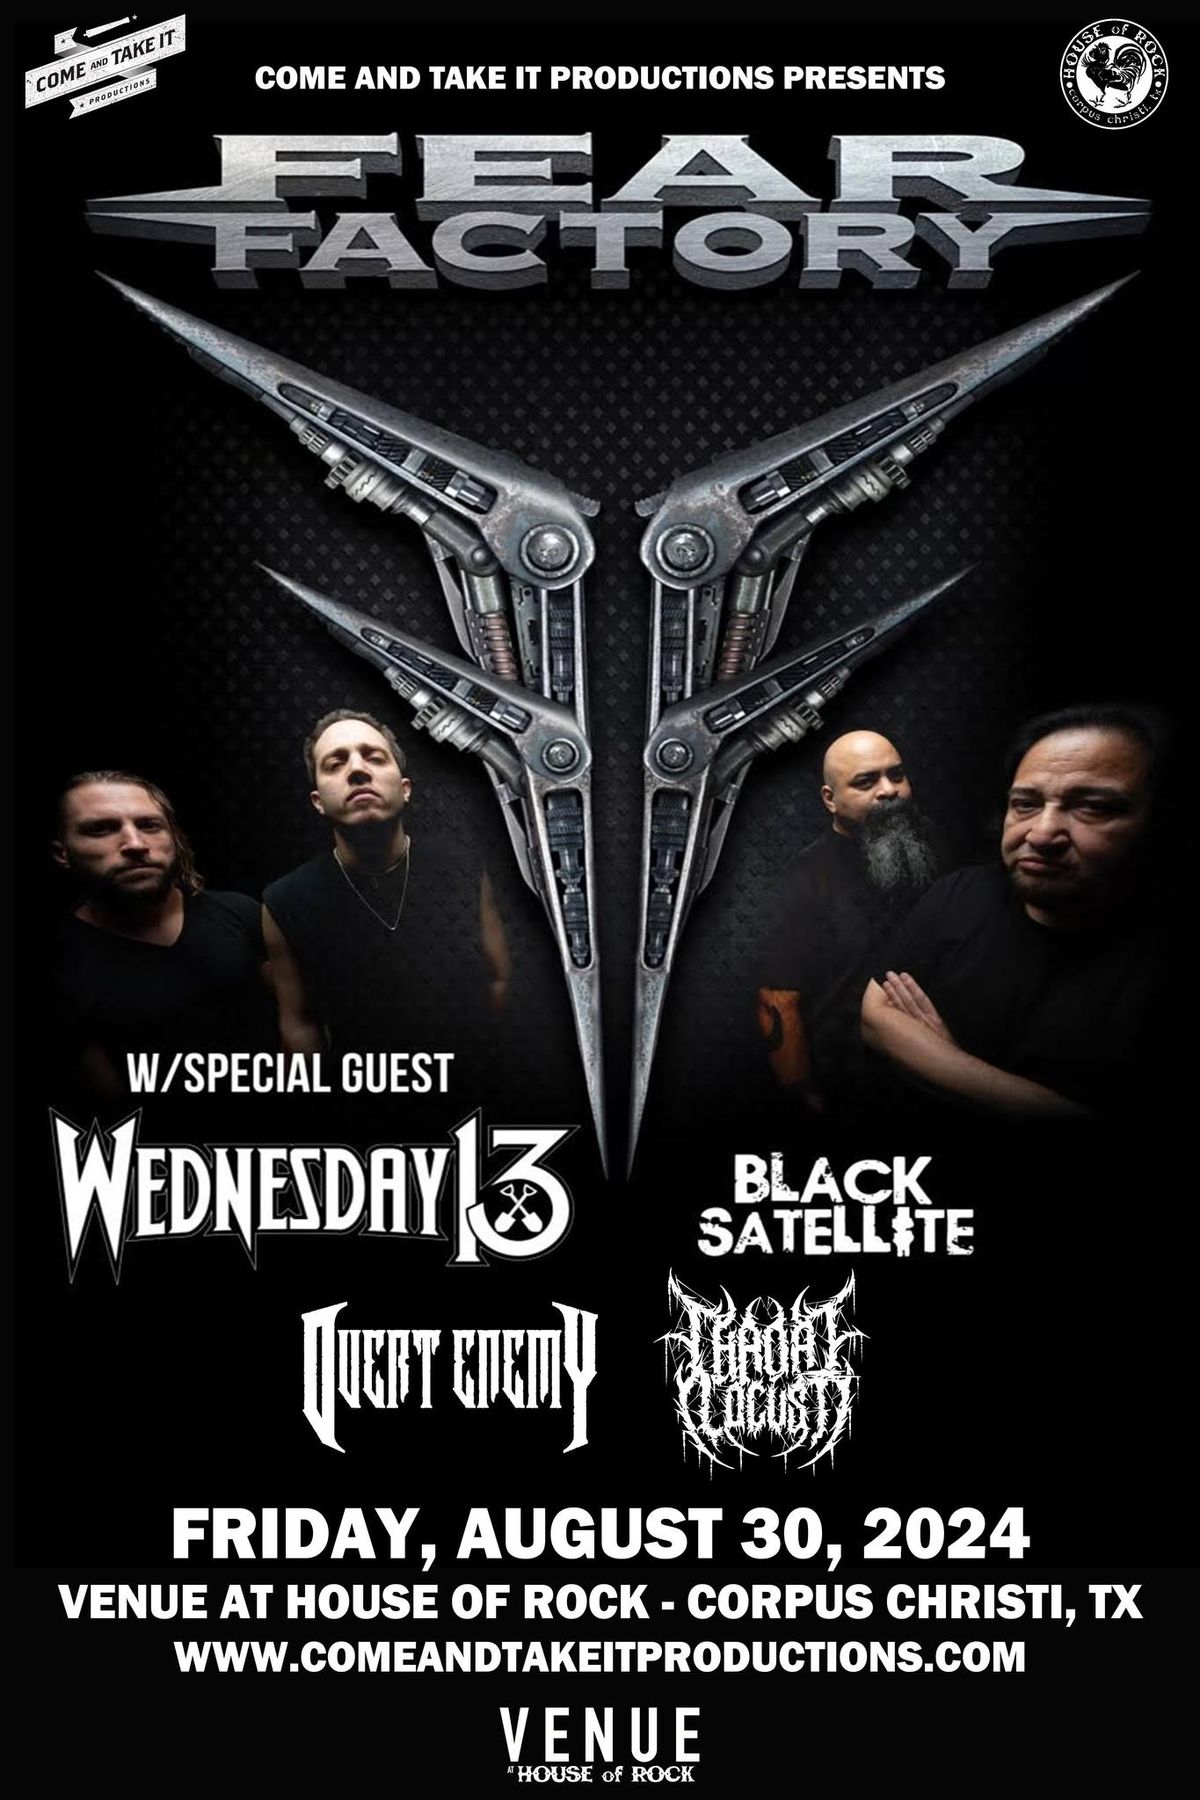 Fear Factory, Wednesday 13, Black Satellite, and MORE at House of Rock!